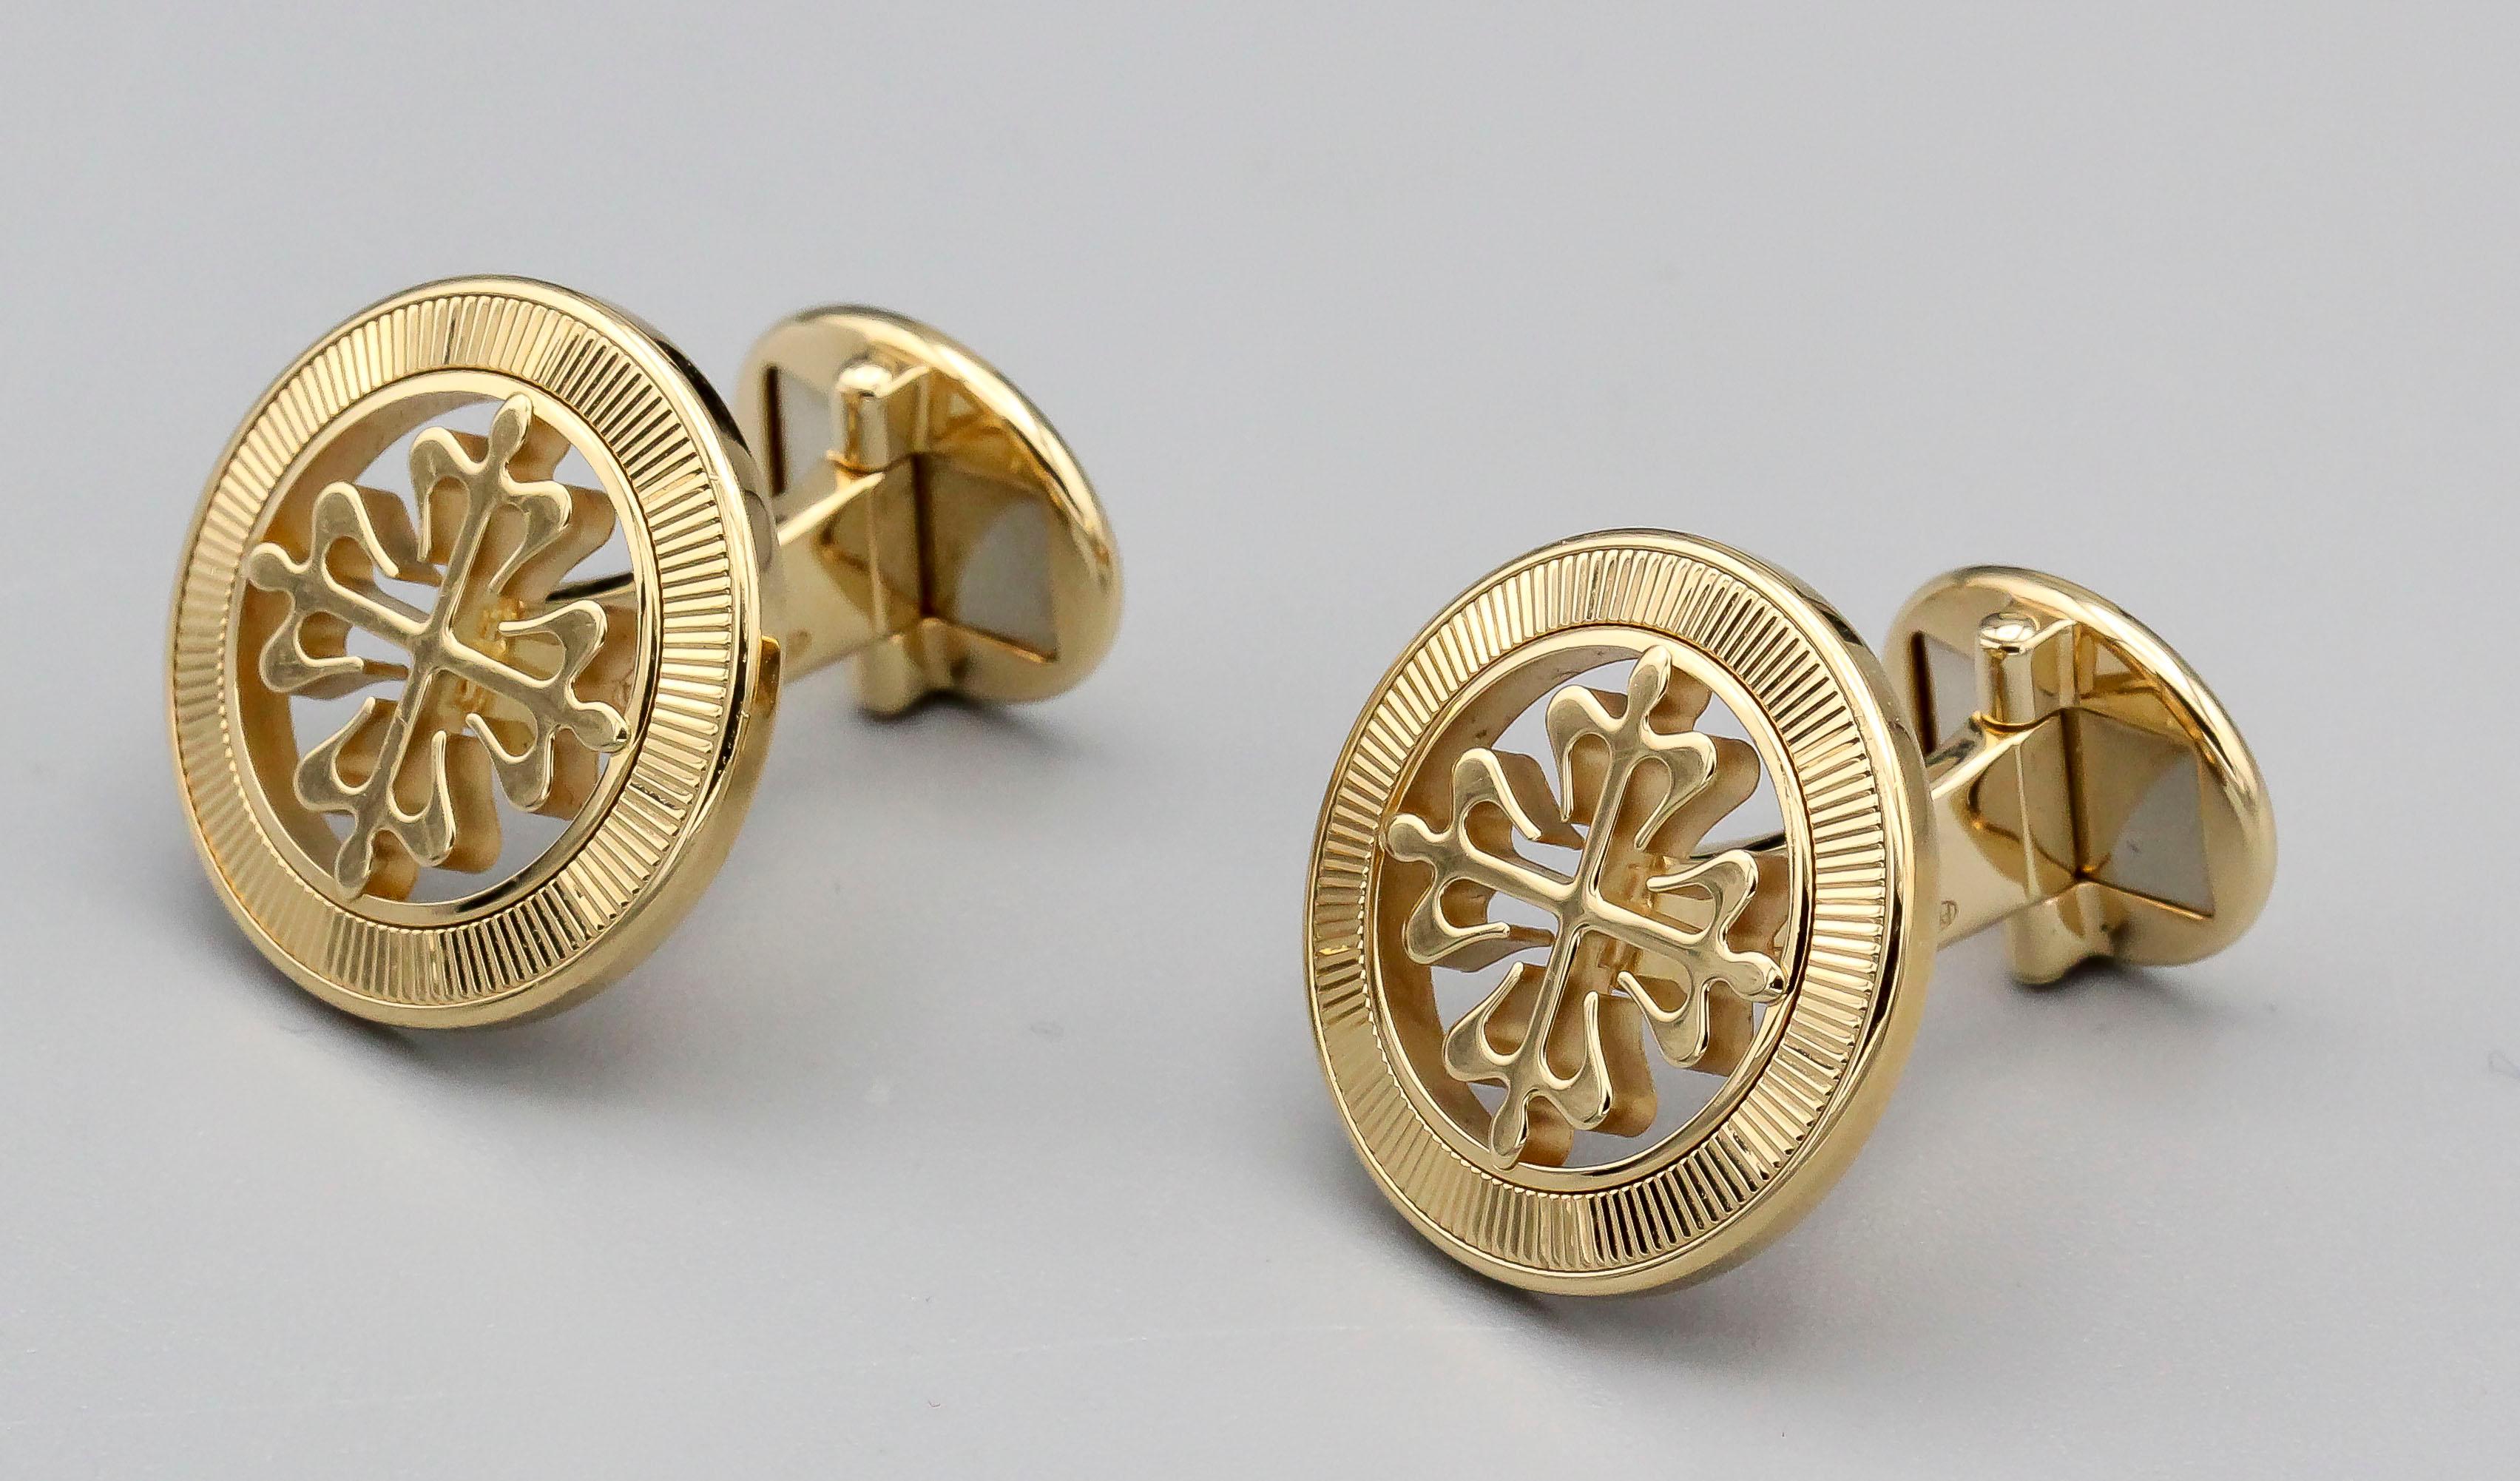 Fine pair of 18K yellow gold cross cufflinks, from the 